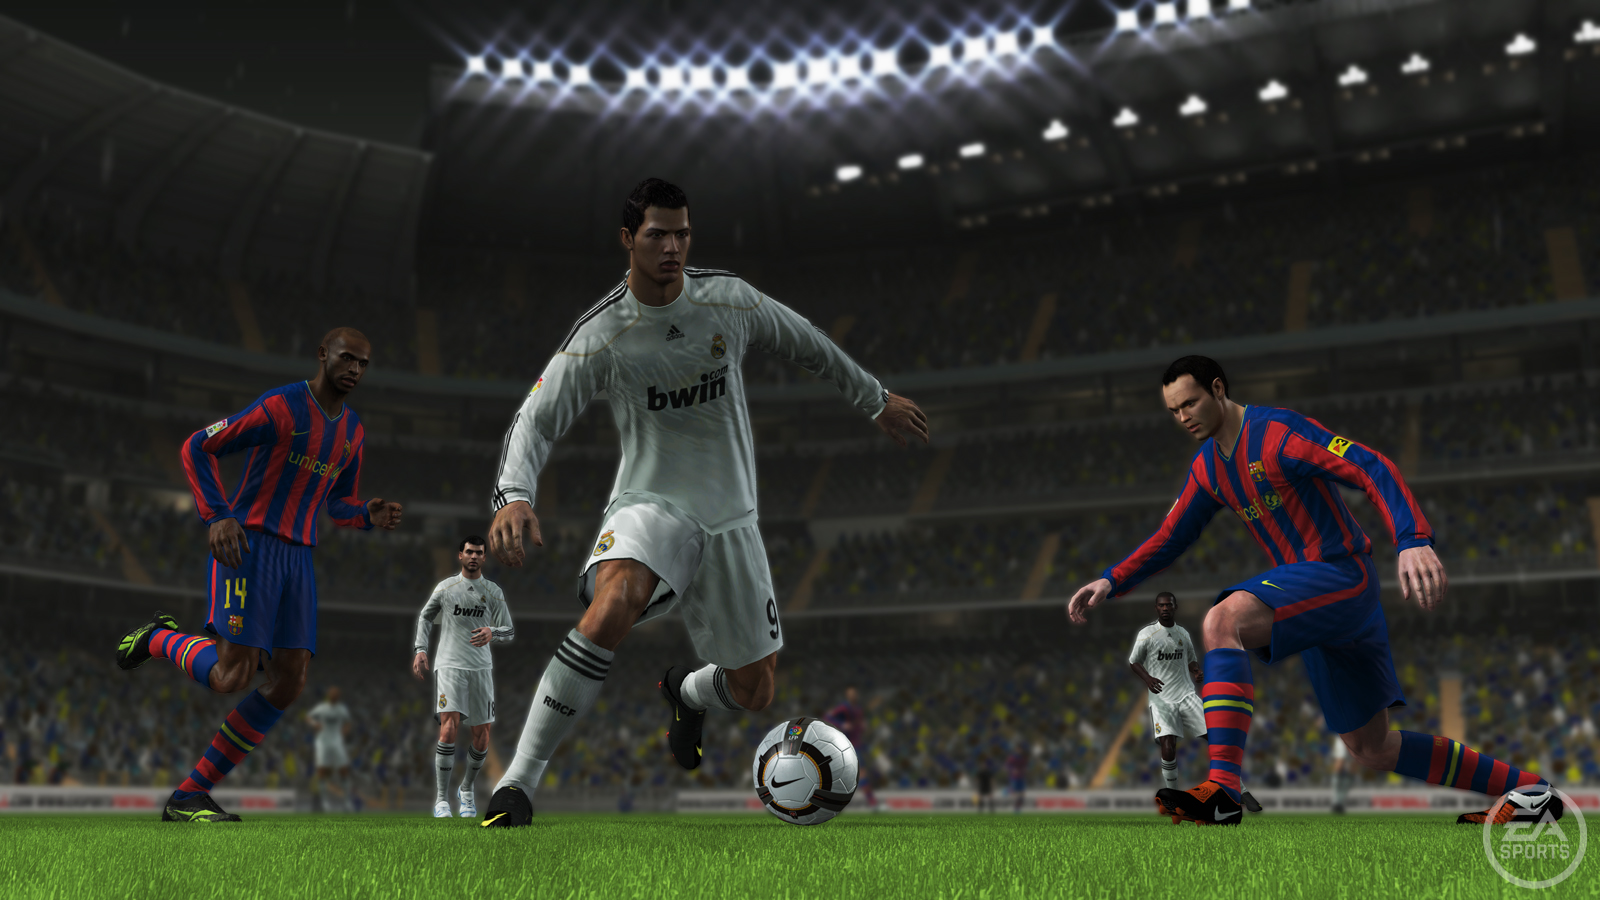 download pes 2010 game 4 gig space